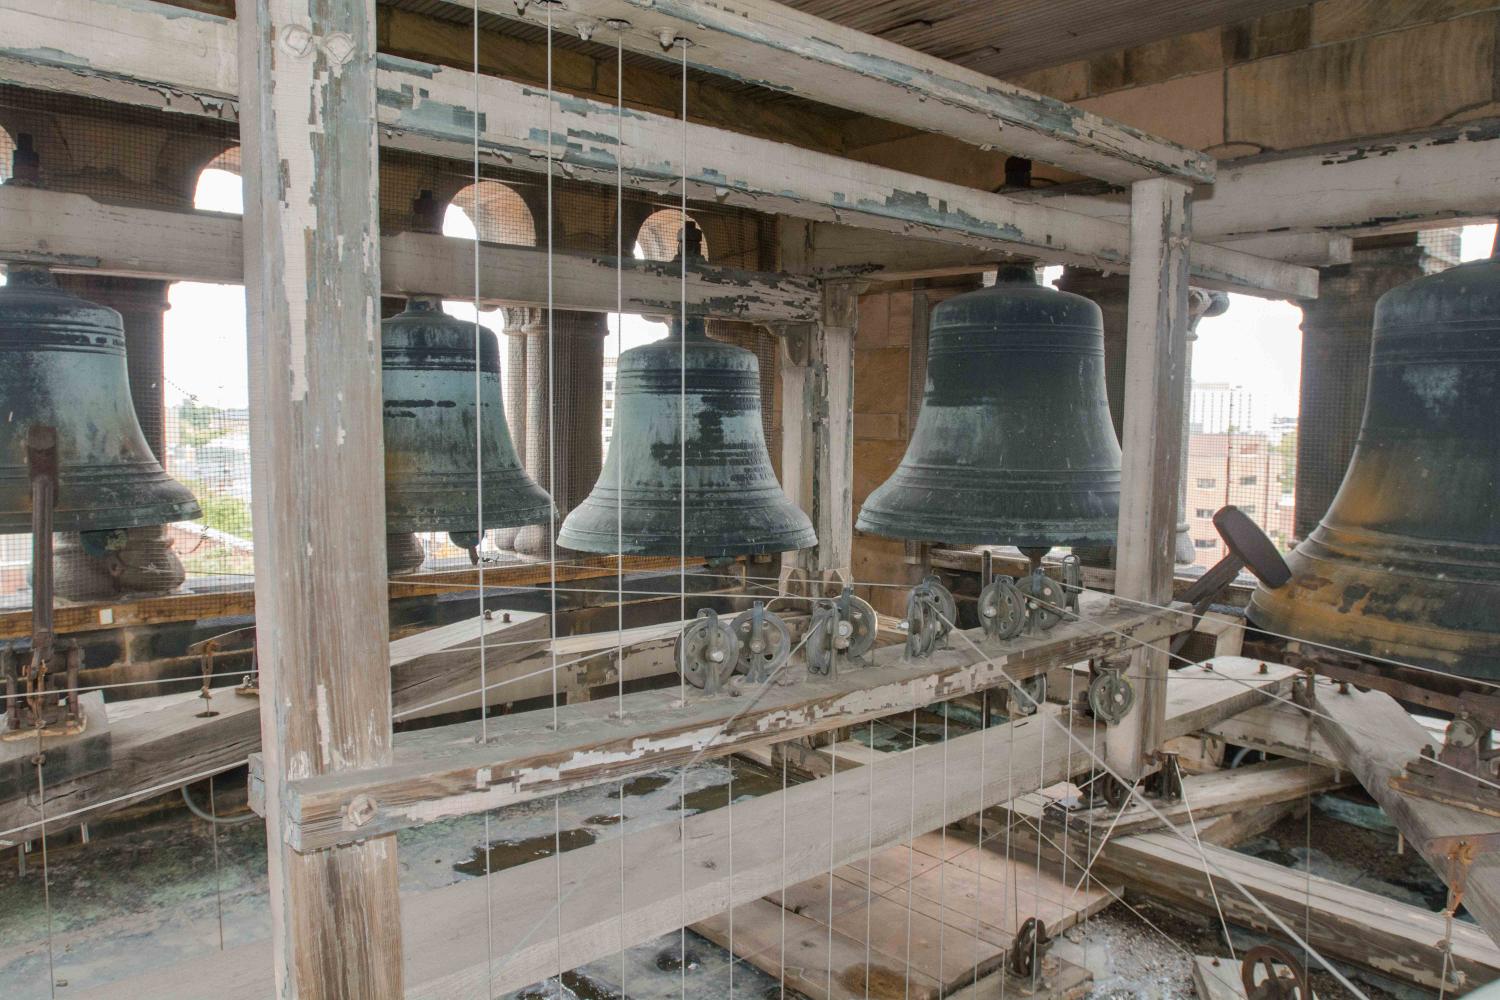 A view of the chime in the Altgeld Hall Tower. The chime was installed in the tower in 1920 as a gift from the classes of 1914 through 1921 and the U.S. School of Military Aeronautics.